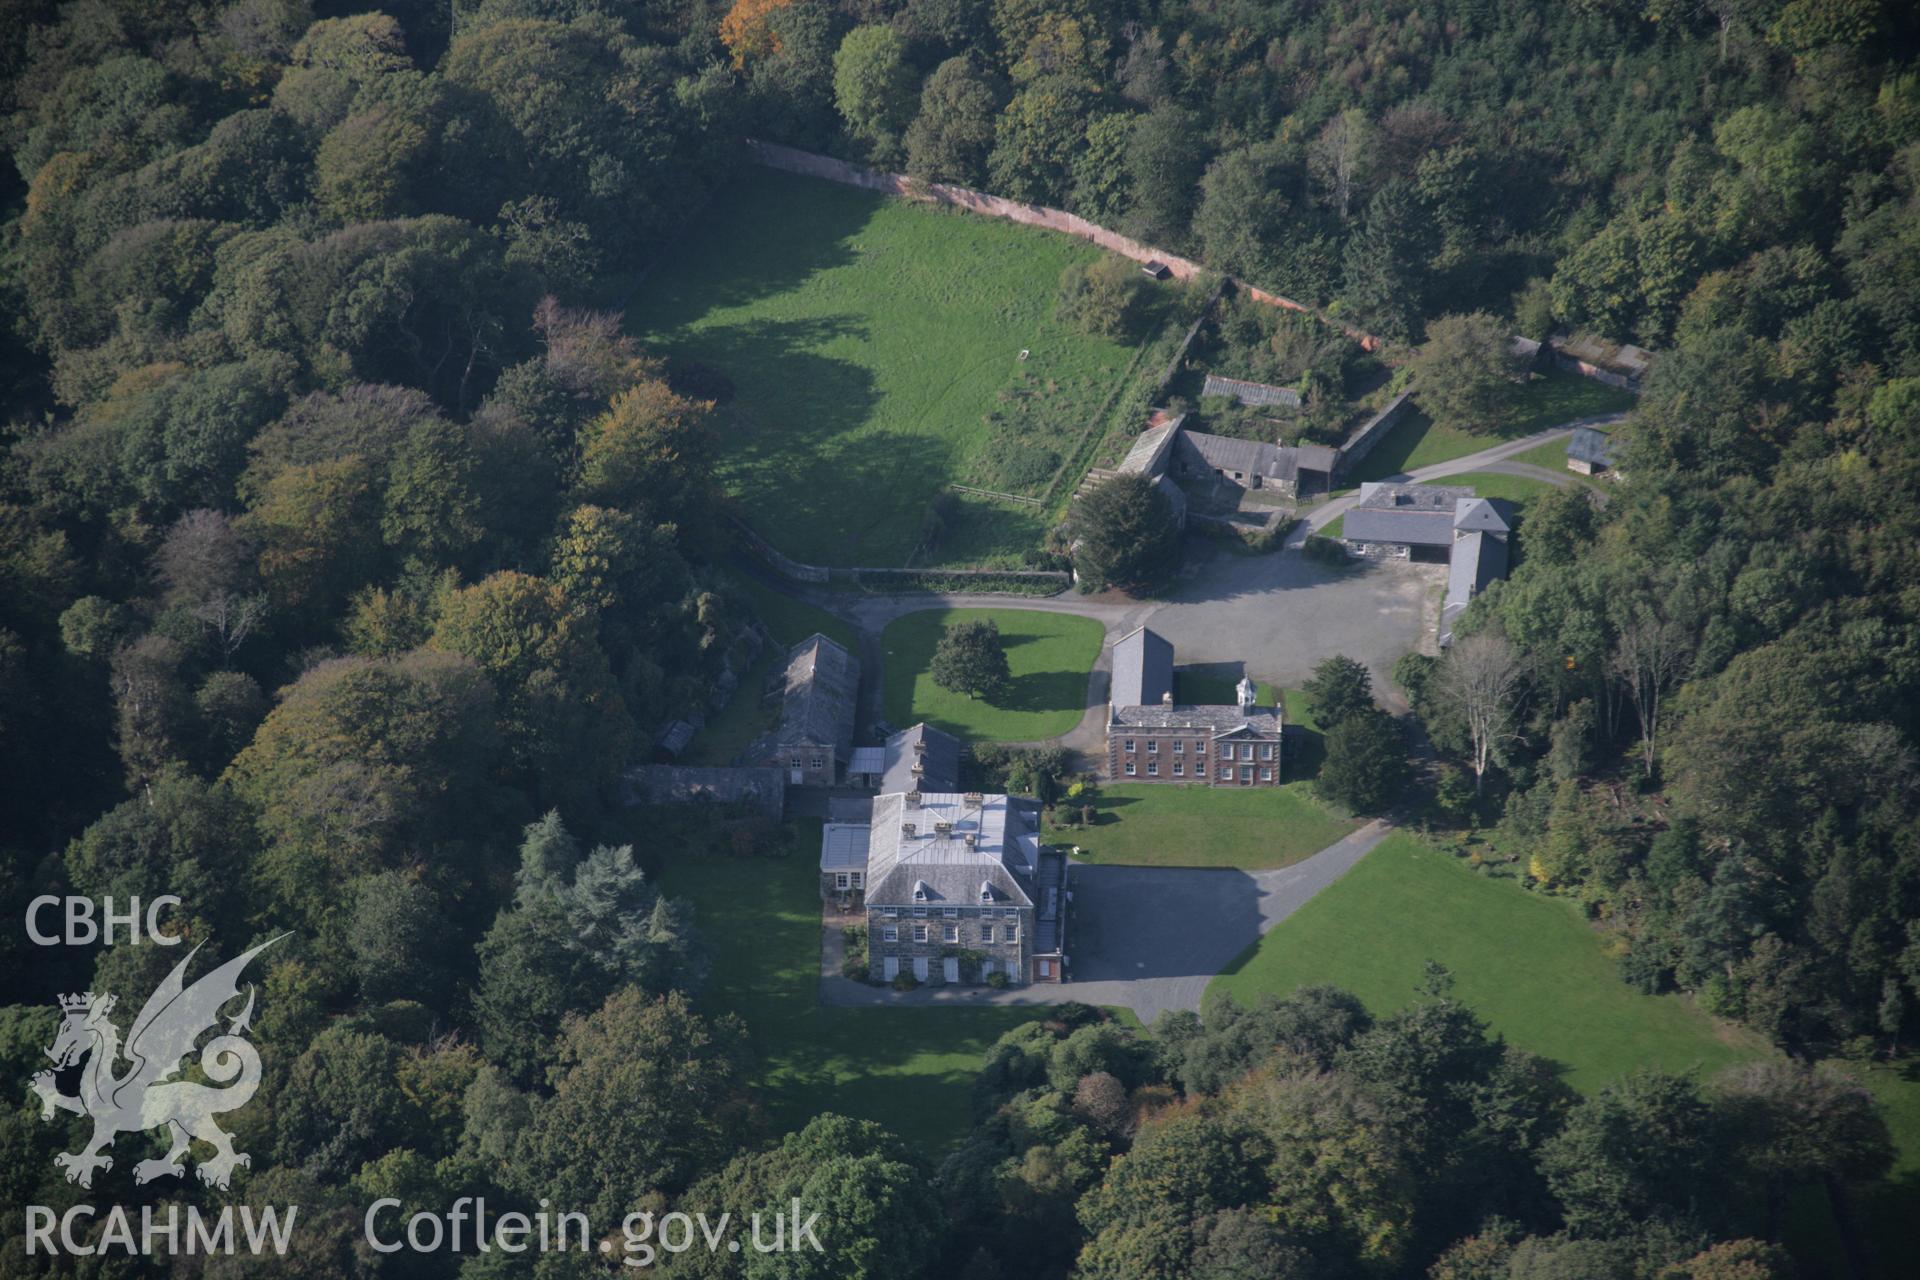 RCAHMW colour oblique aerial photograph of Peniarth Country House, viewed looking north-west. Taken on 17 October 2005 by Toby Driver